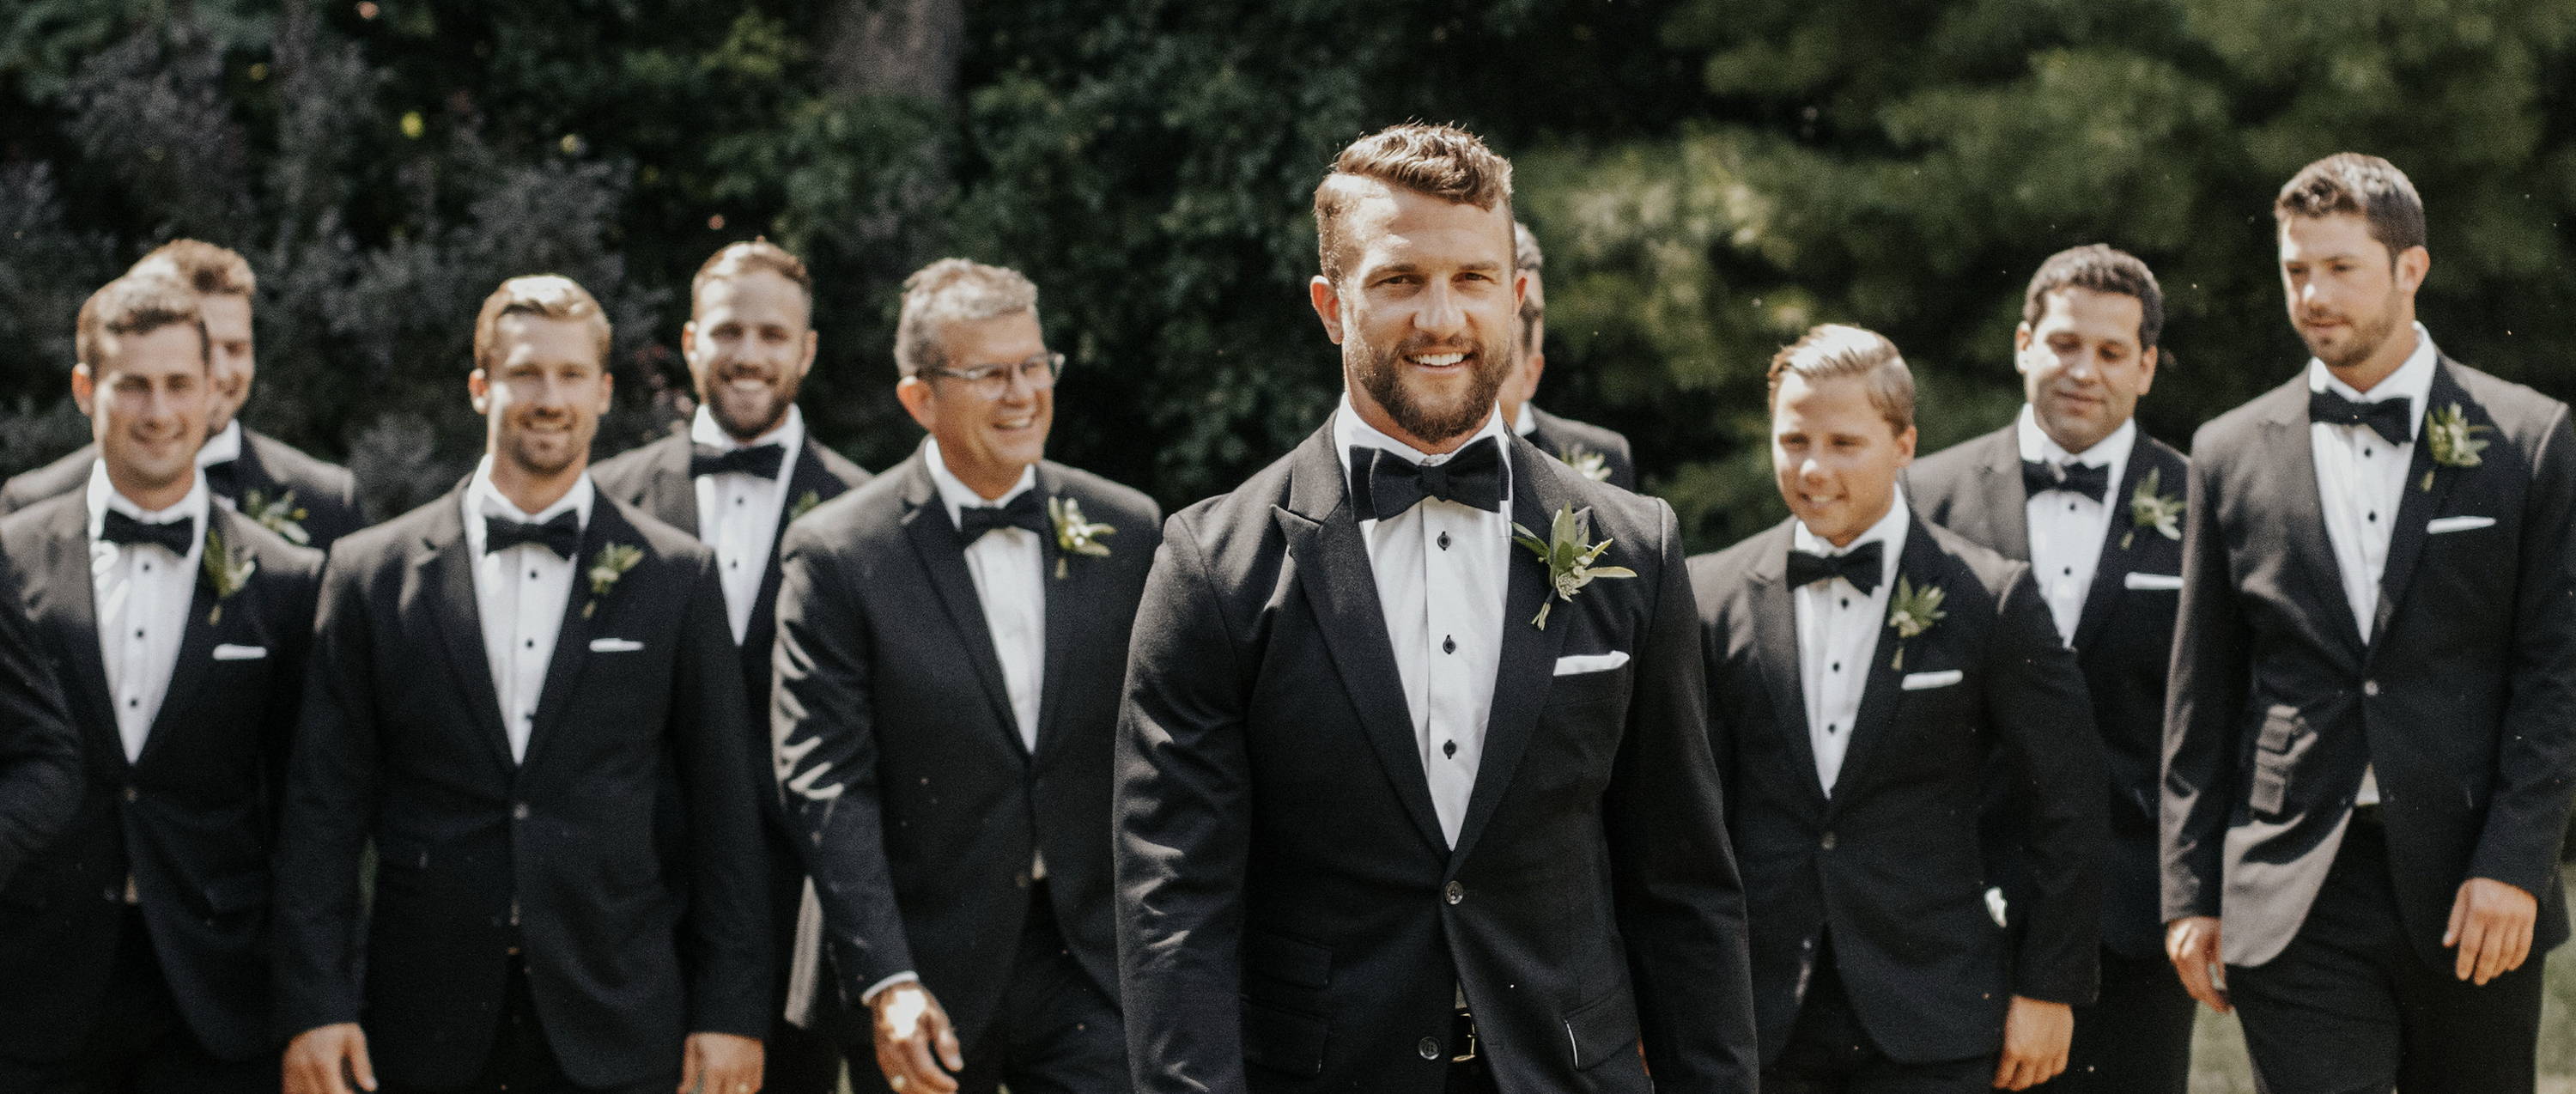 Renting vs. Buying Wedding Suits and Tuxedos